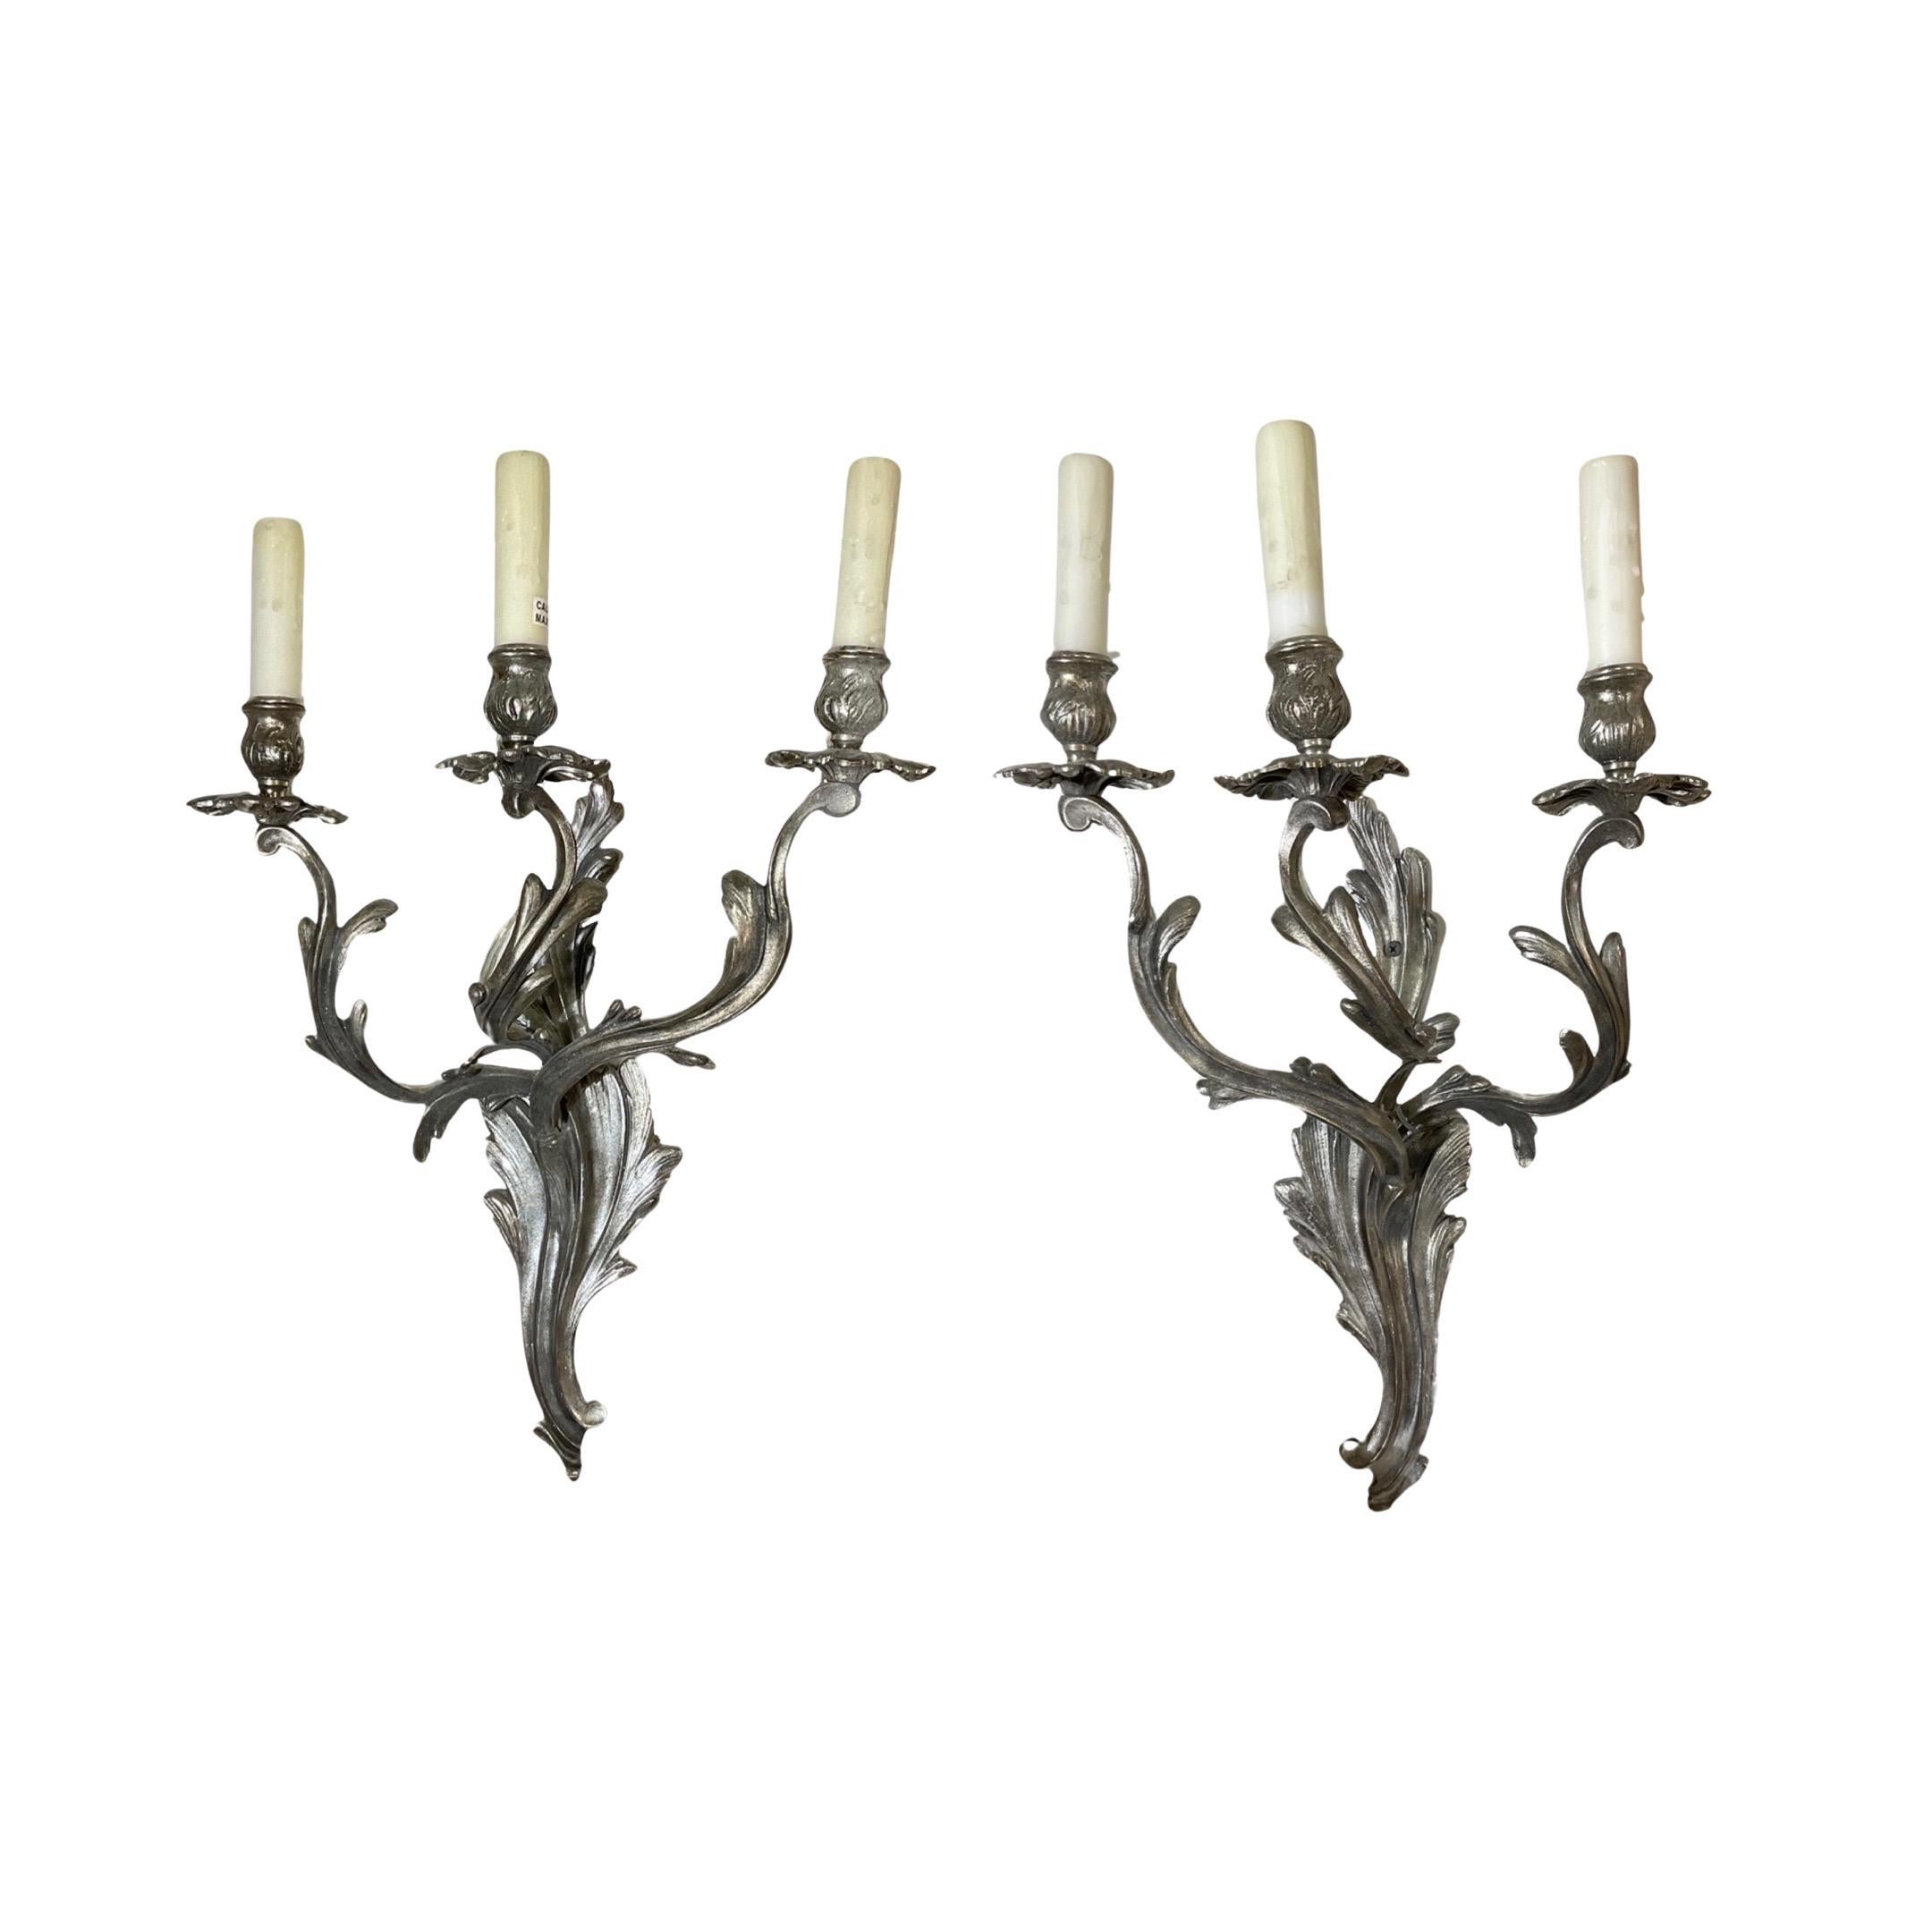 This pair of French Silver Sconces, circa 1880, feature ornate silver detailing and a classic design, perfect for any living space. Handcrafted from silver in France, this pair boasts quality construction and craftsmanship. Add a touch of elegance